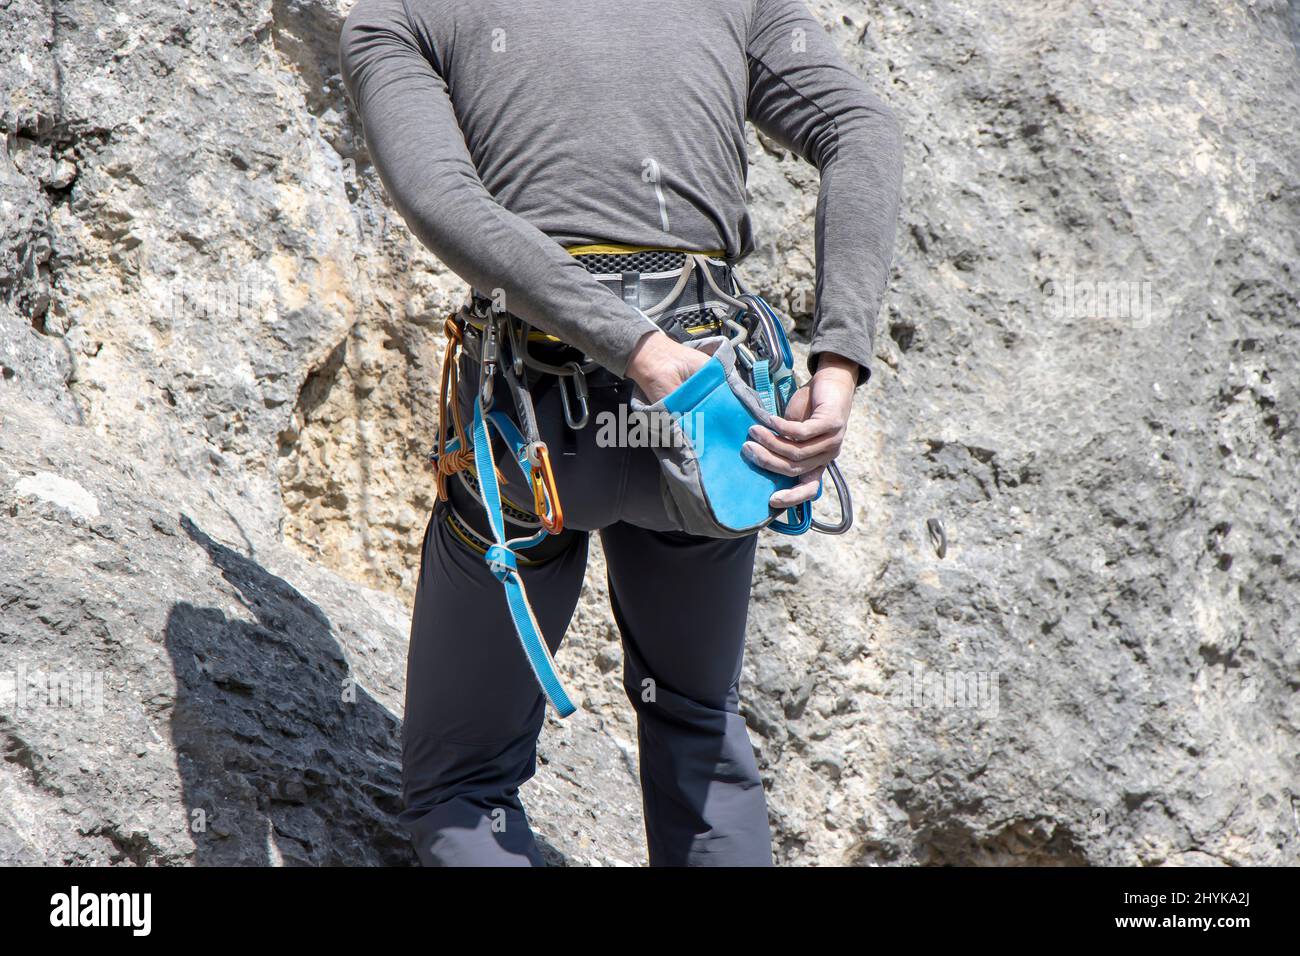 A young climber takes magnesium in his hands before climbing a rock Stock Photo